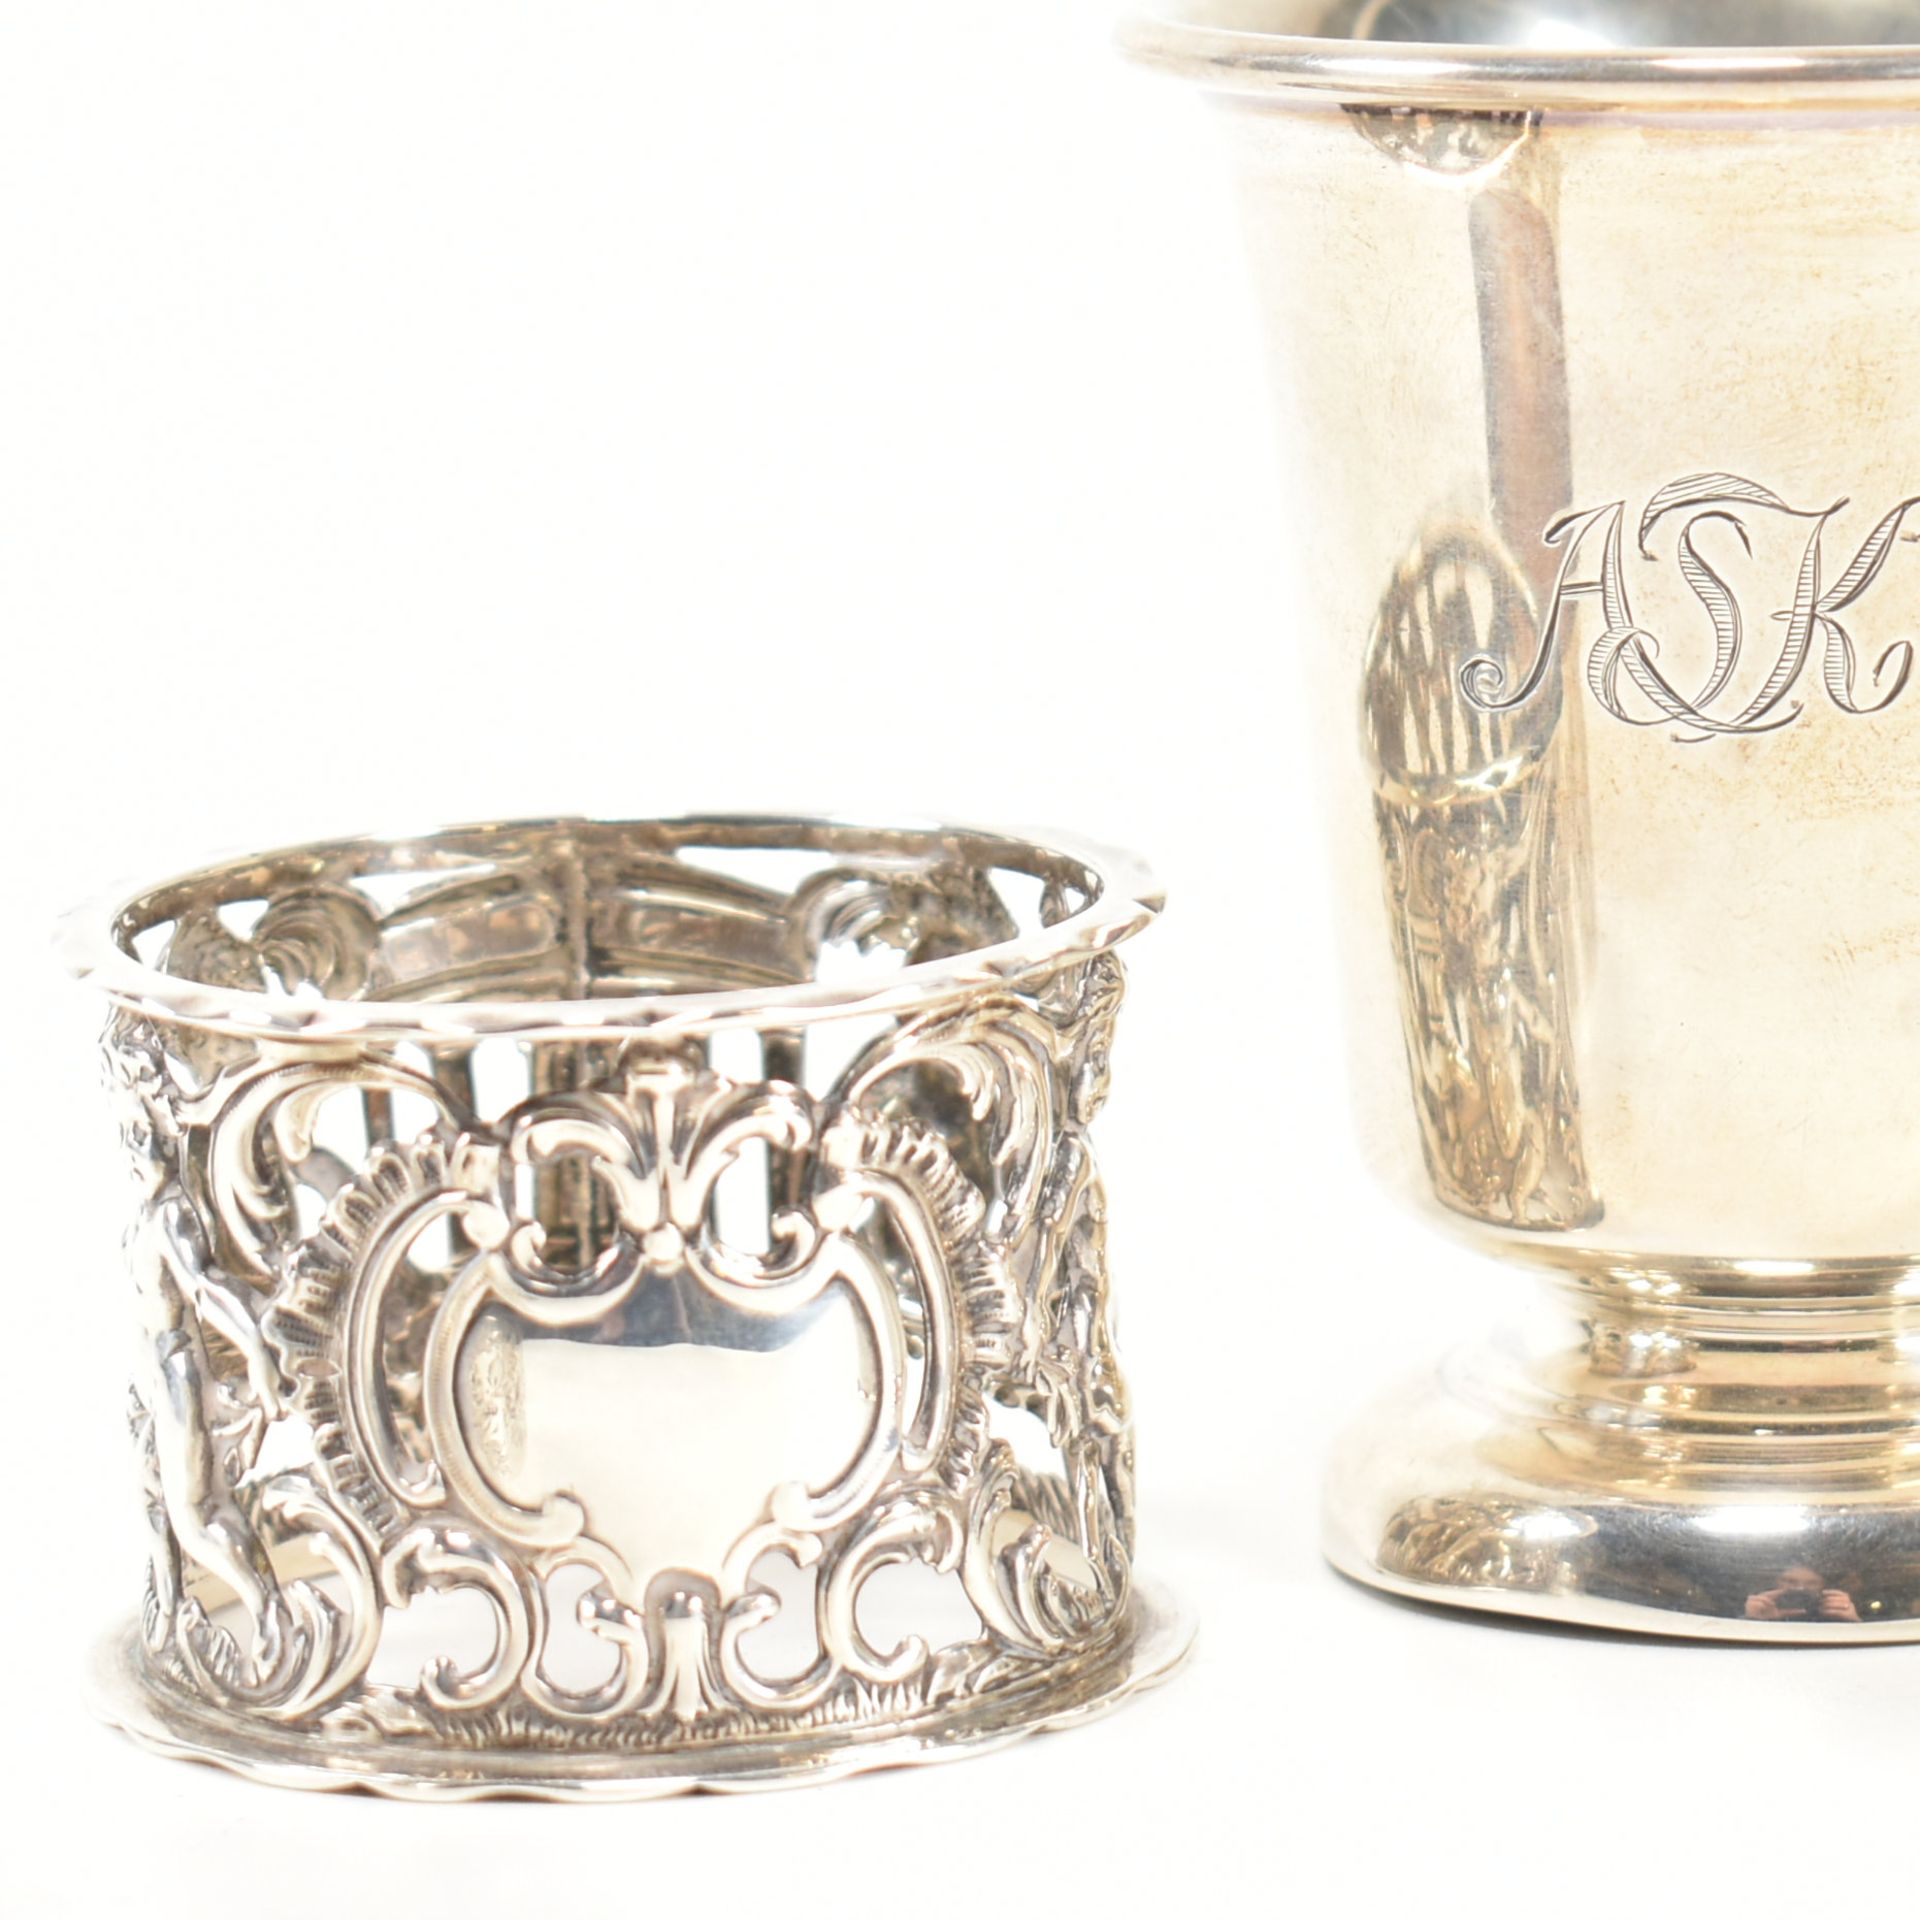 VICTORIAN & LATER HALLMARKED SILVER ITEMS CUP & NAPKIN RINGS - Image 3 of 8